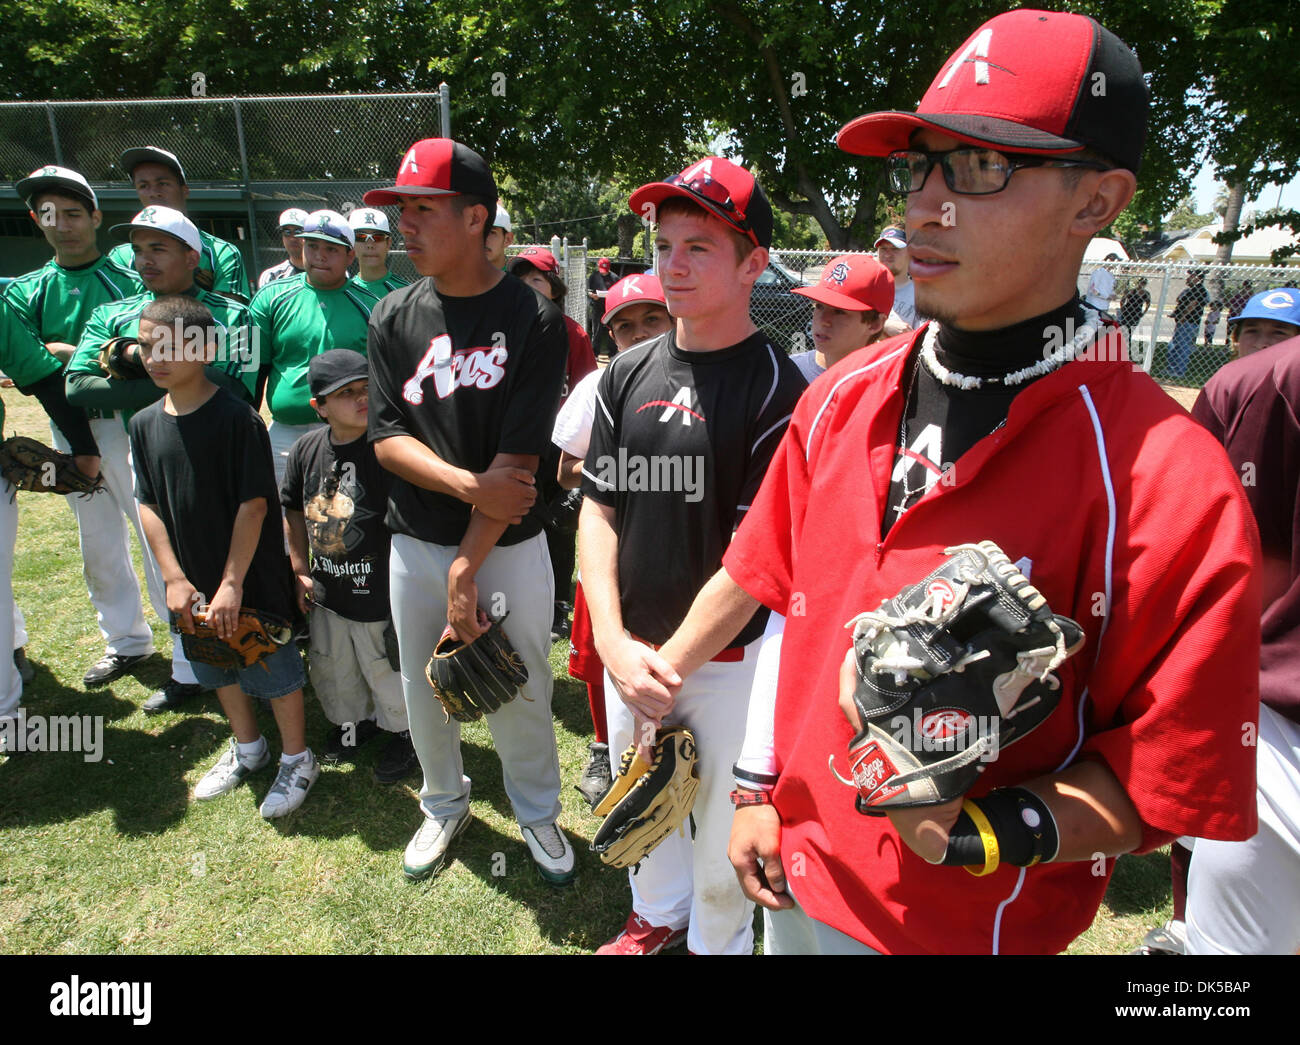 April 30, 2011 - Fresno, California, U.S. - JOHN WALKER/THE FRESNO BEE.Fernando Gutierrez from Tranquility, right, and other baseball players listen to Thomari Story-Harden during the Centeral Valley RBI (Reviving Baseball in Inner Cities) clinic Saturday, April 30, 2011, at Roosevelt High. Major League baseball created RBI as a way to draw more minorities into the sport. This more Stock Photo